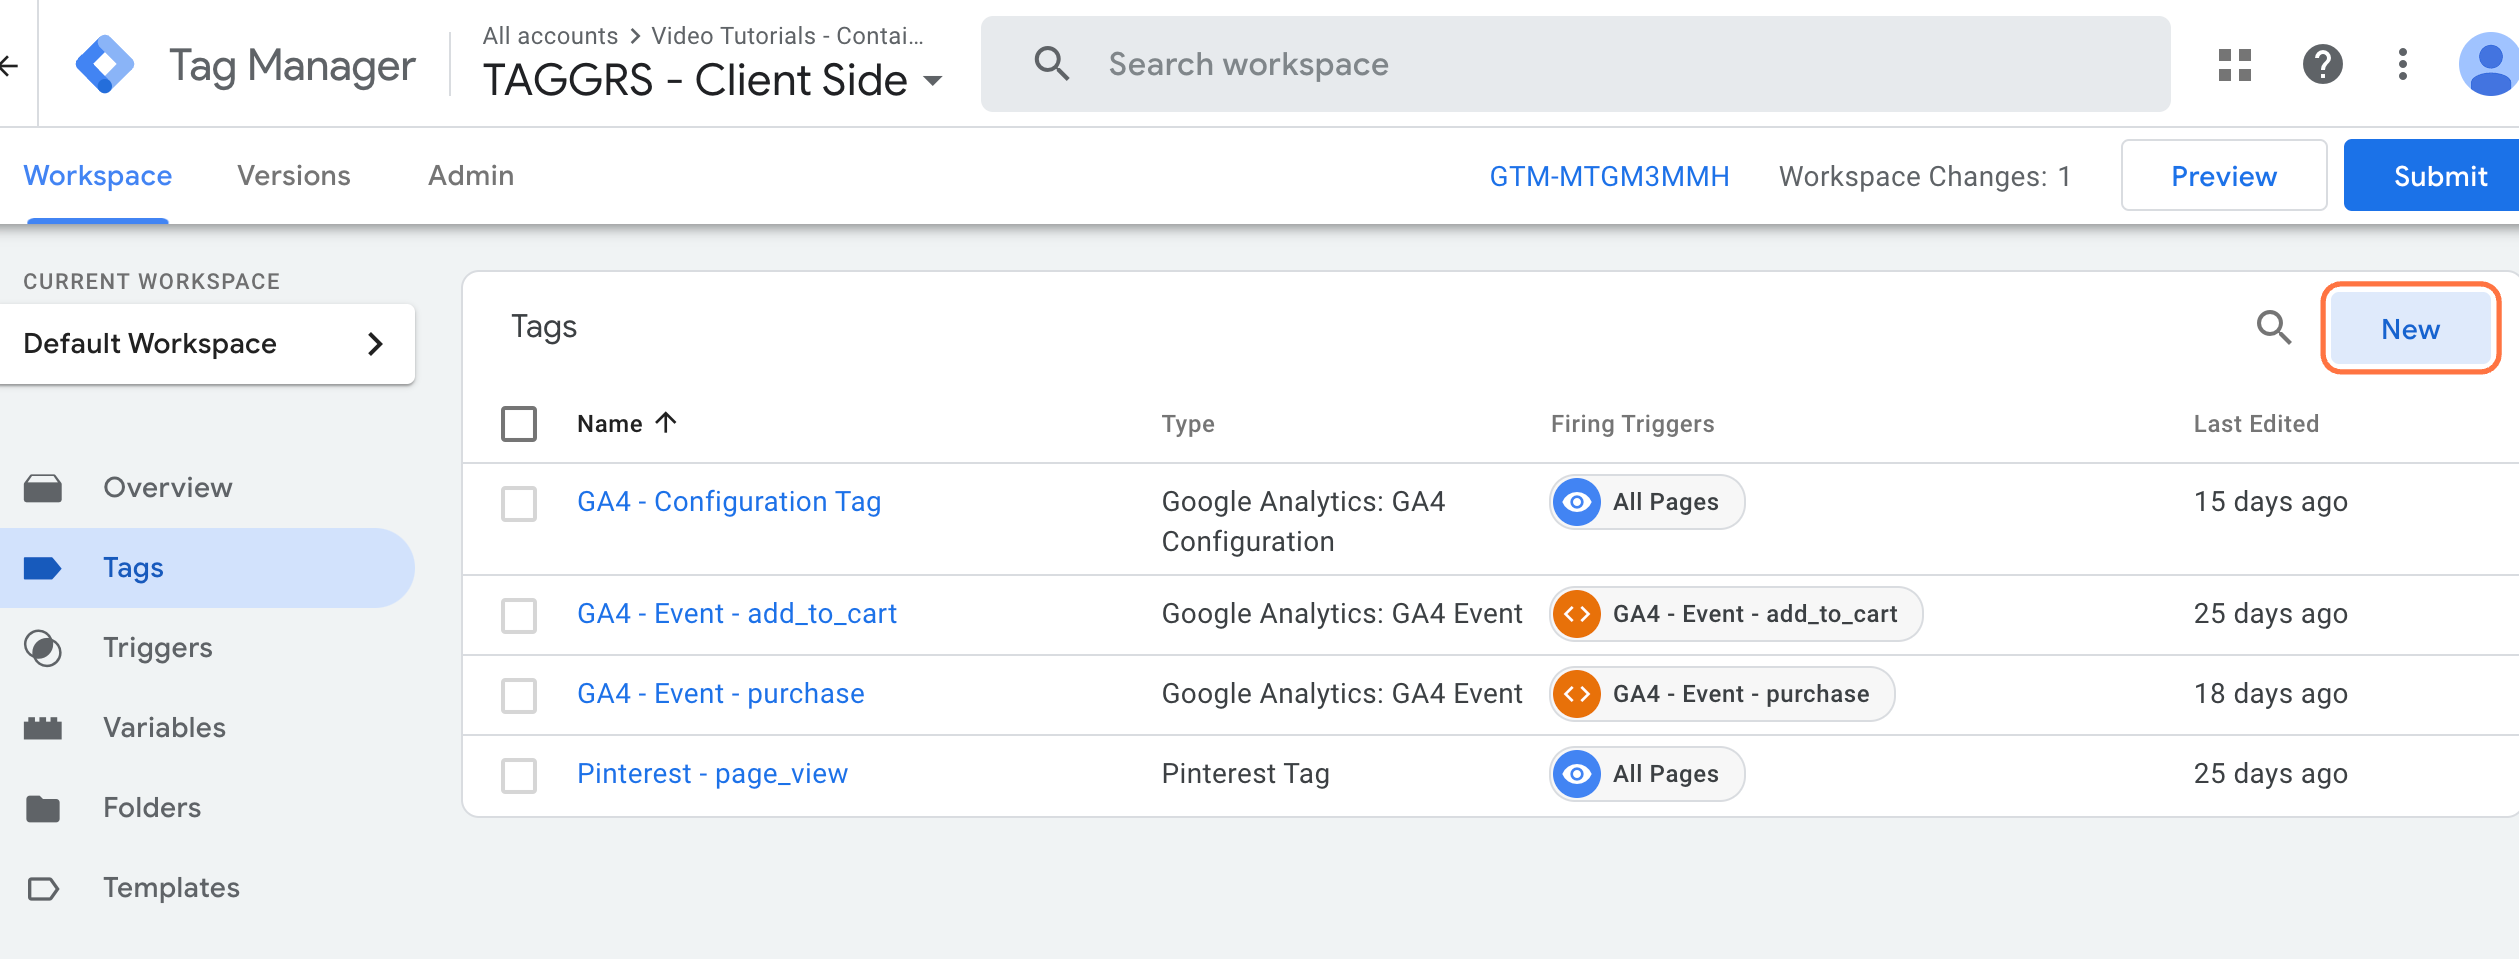 create new tag workspace google tag manager web container